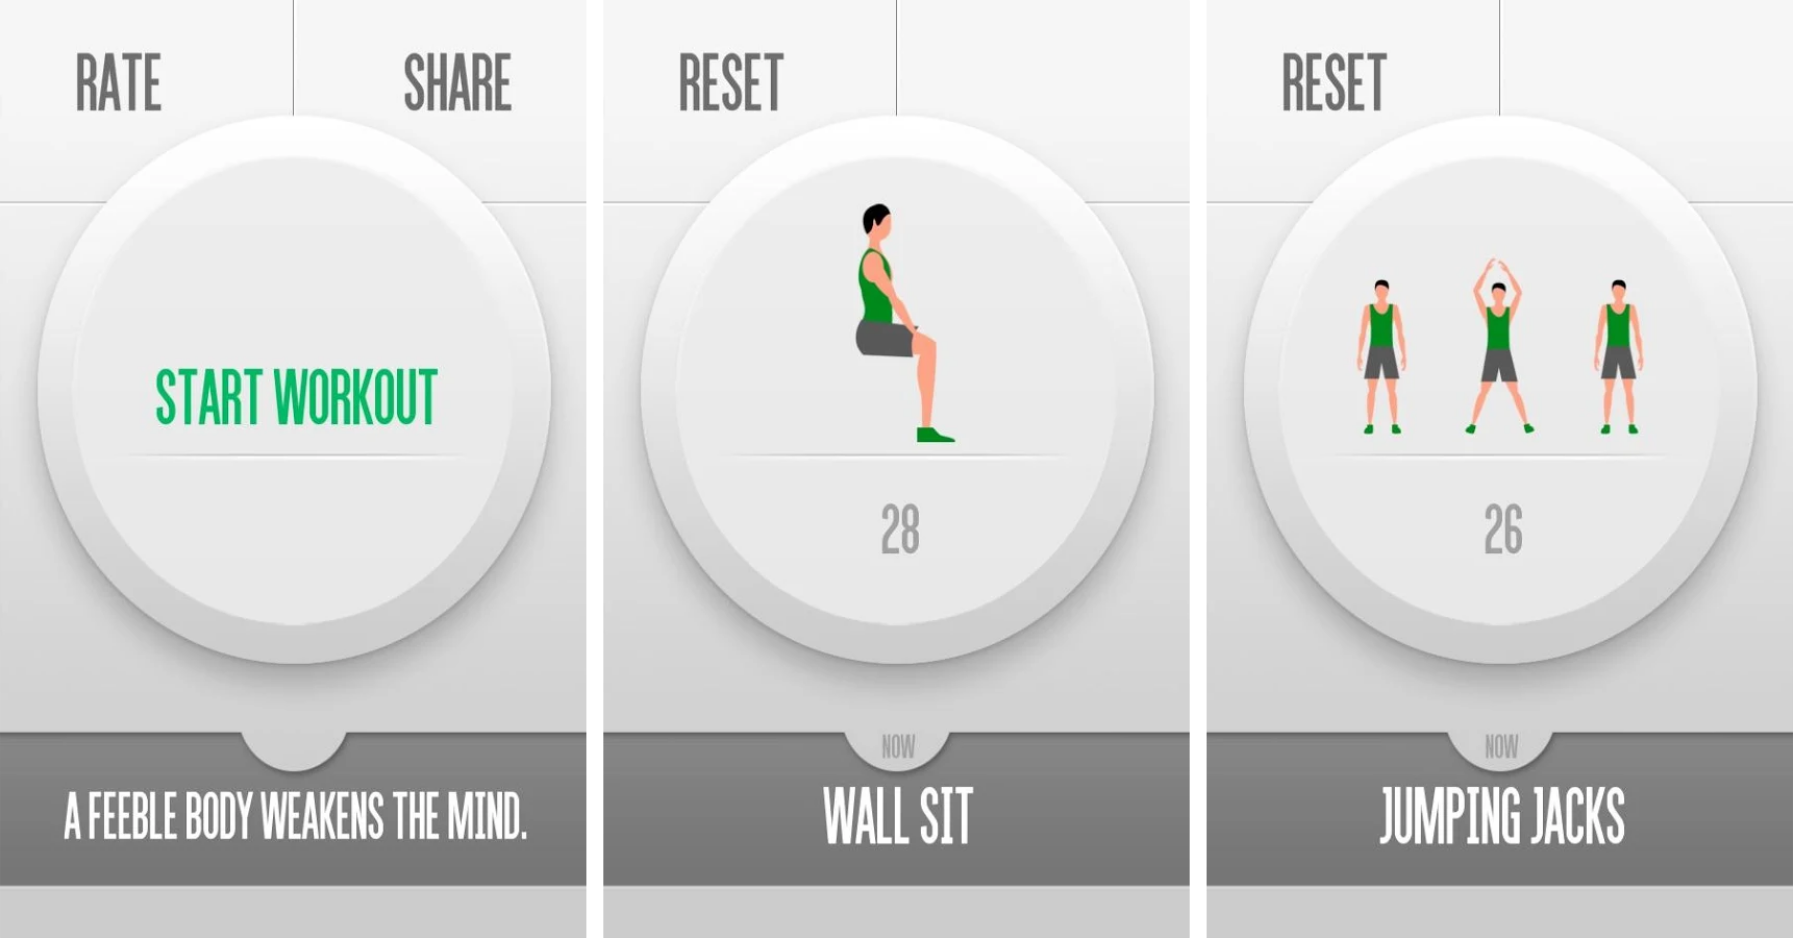 the most minimal 7-minute workout app